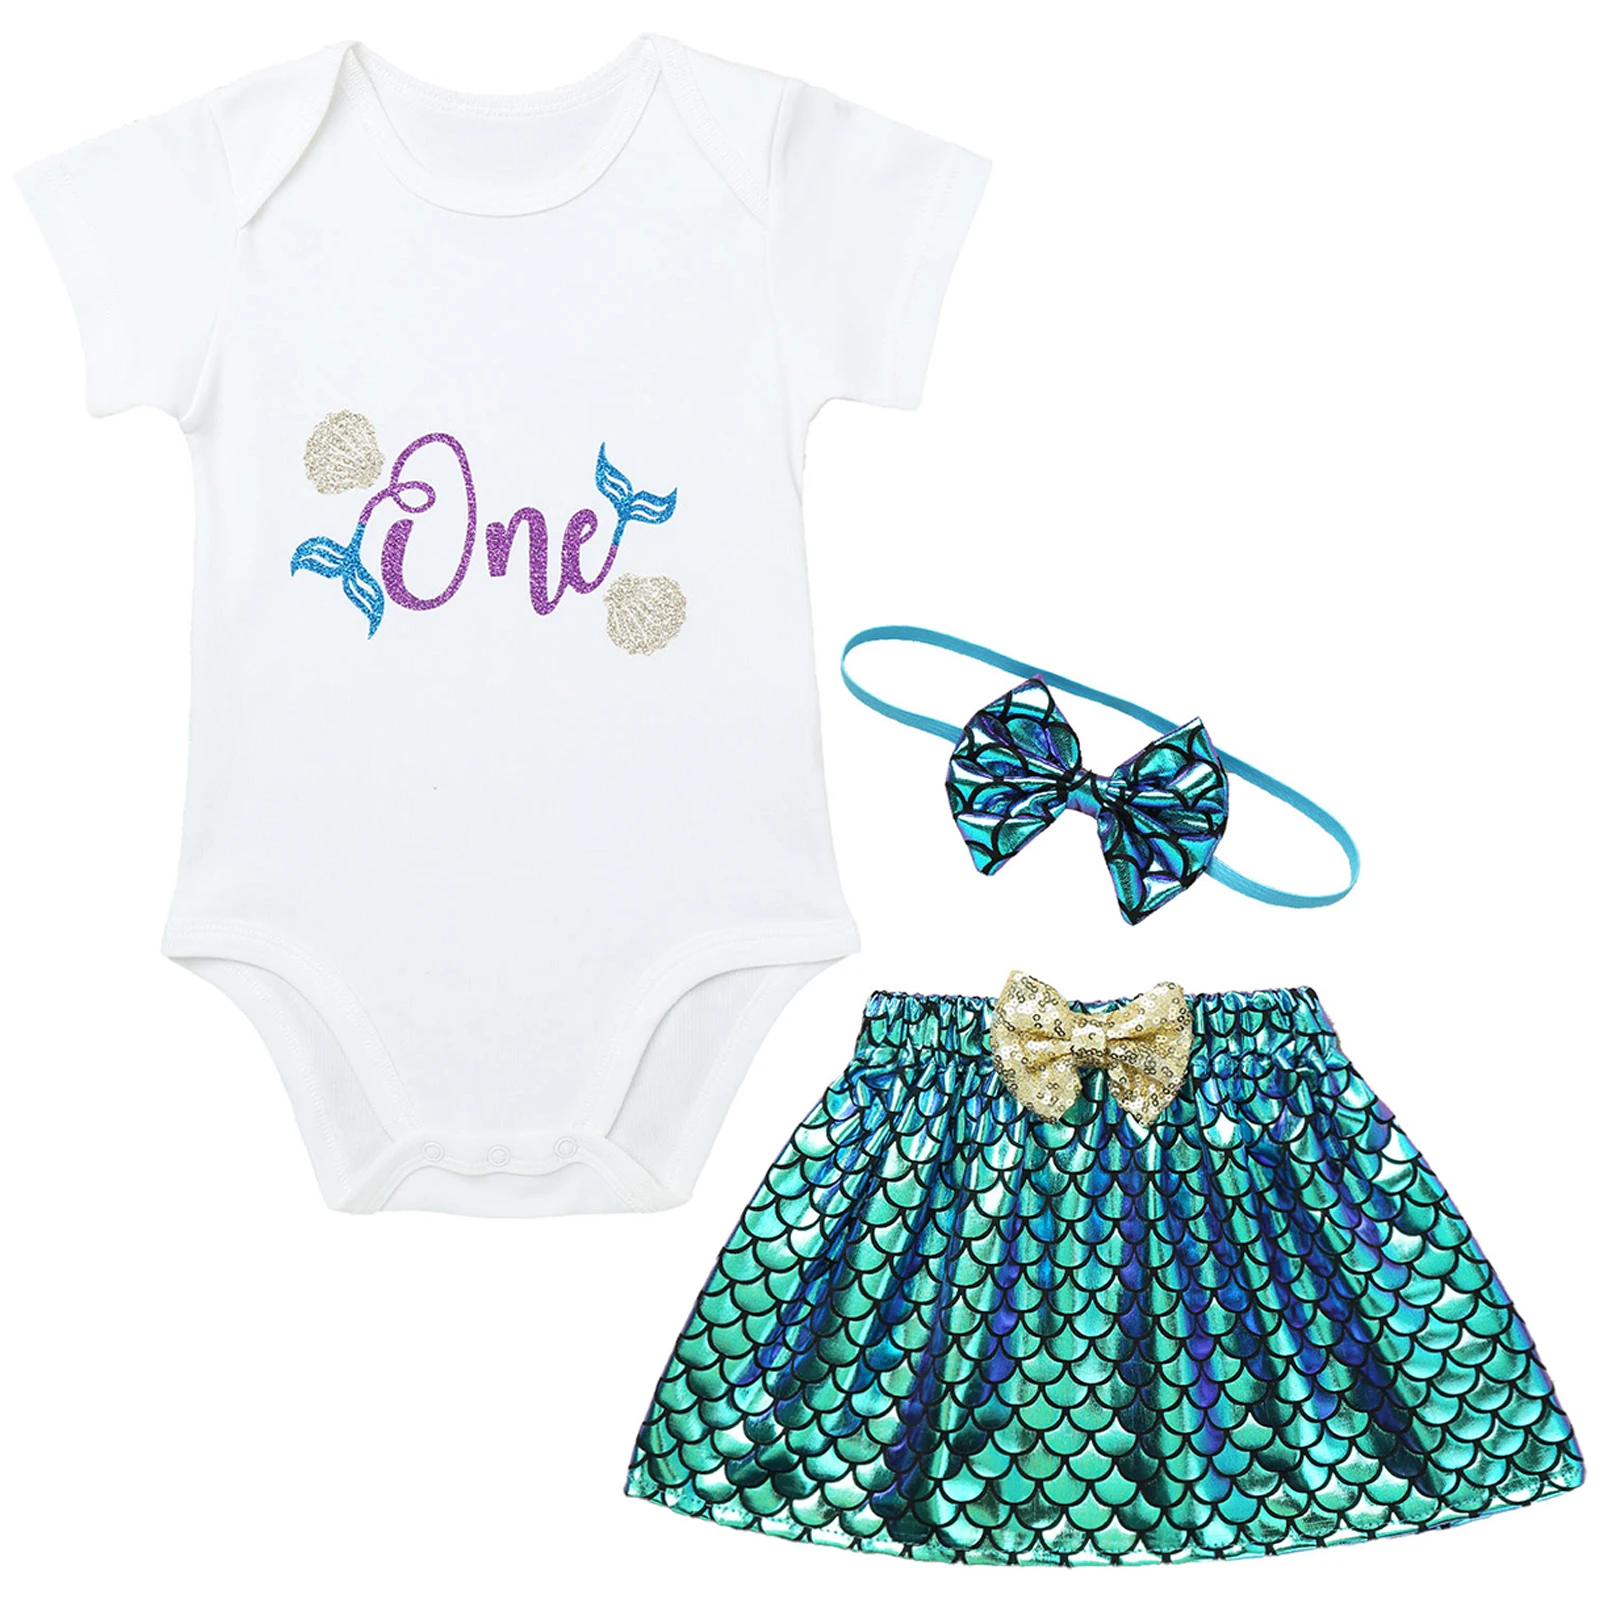 baby dress and set Baby Girl Princess Clothes Set Mermaid 1st Birthday Party Outfit Shell Romper Sequins Fish Scales Dress Bowknot Headband Costume baby's complete set of clothing Baby Clothing Set